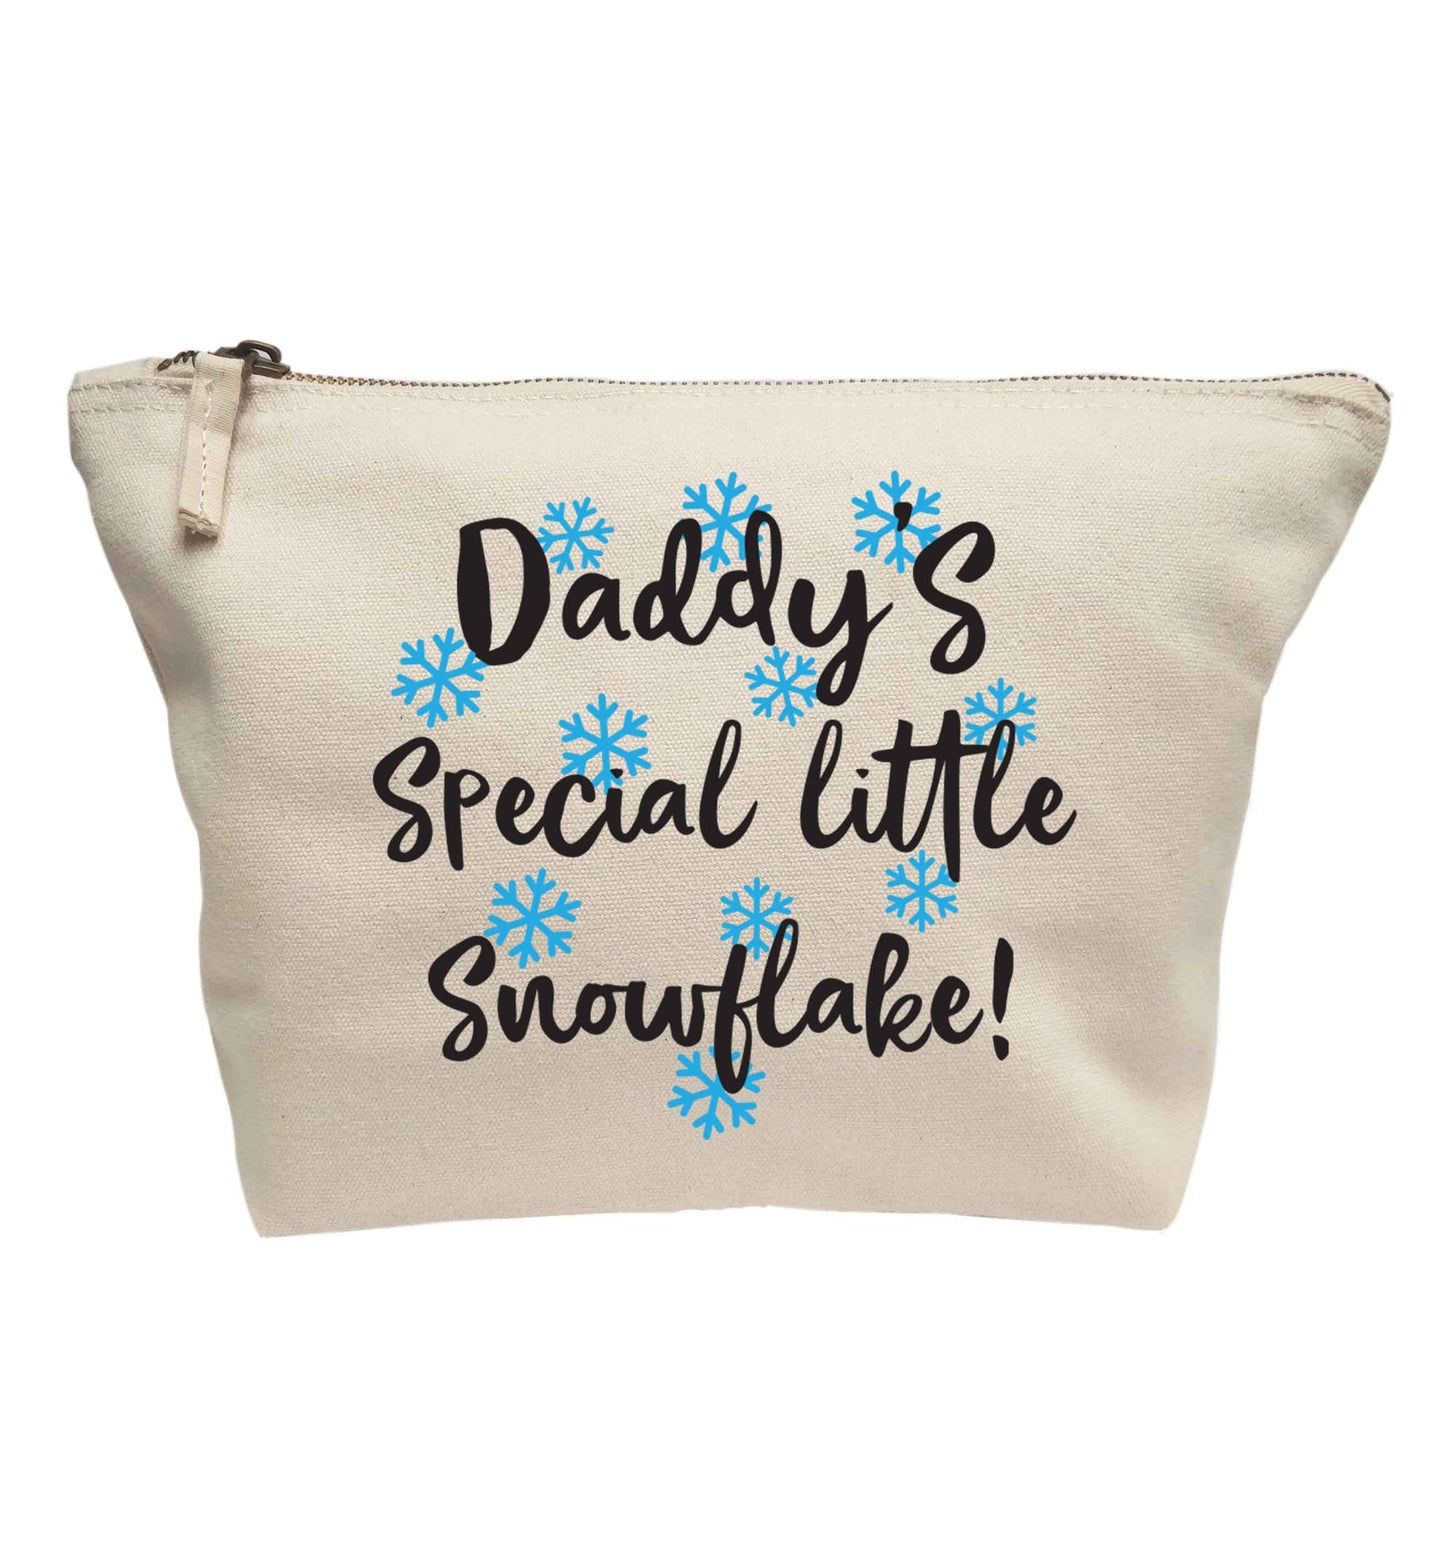 Daddy's special little snowflake | makeup / wash bag